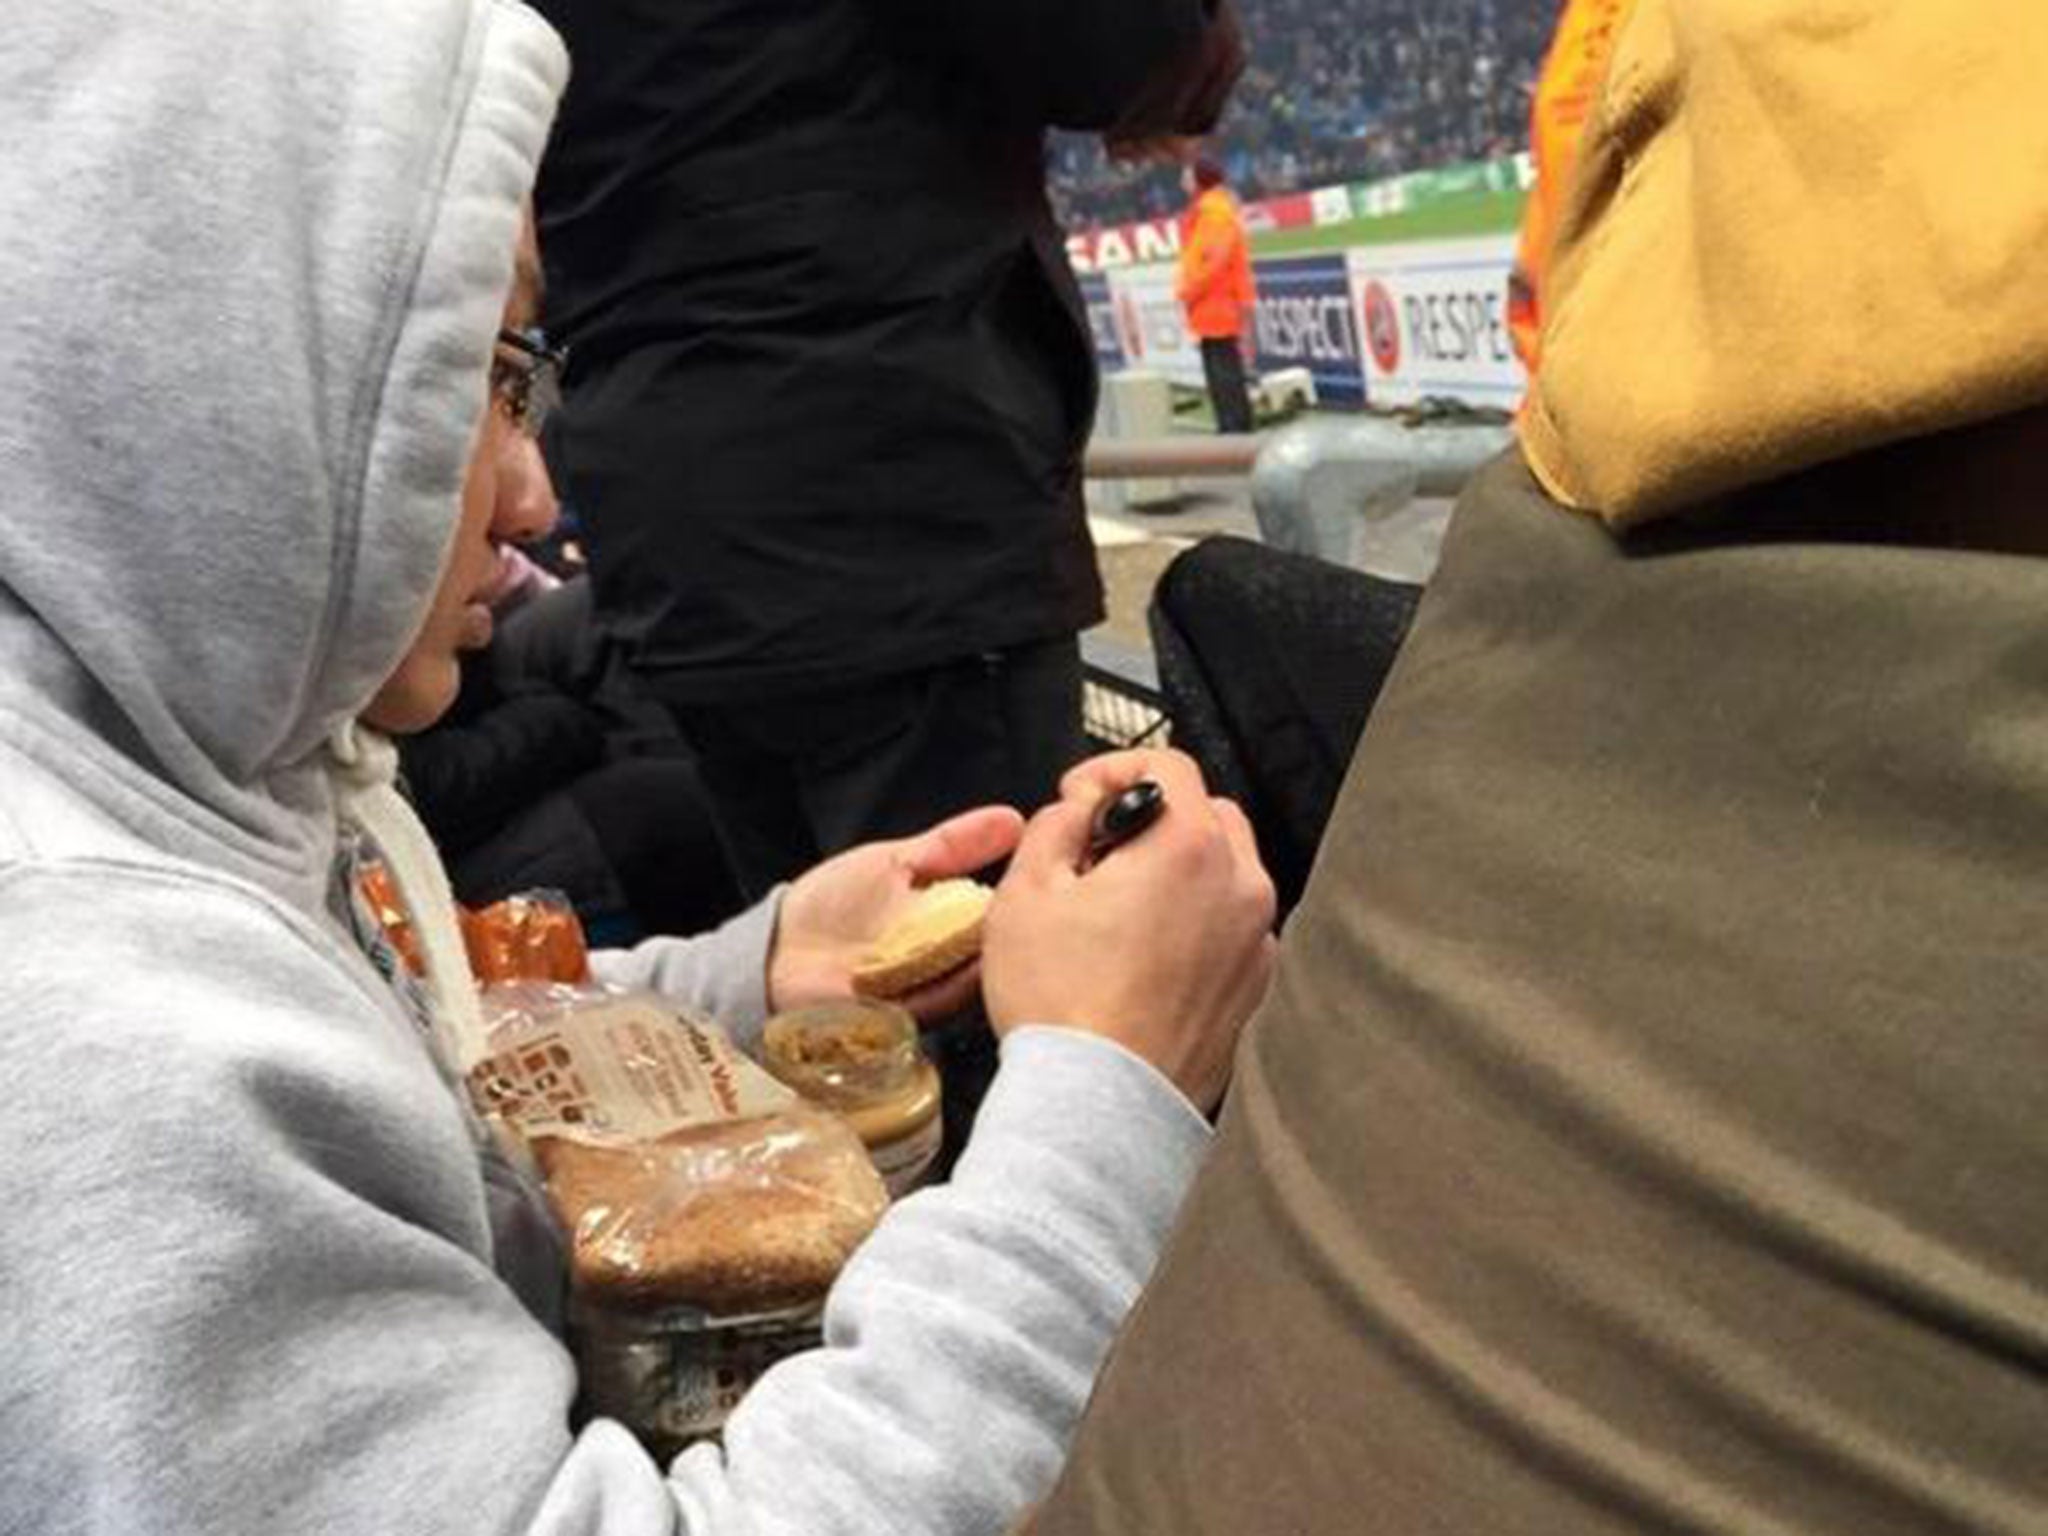 A Manchester City fan makes a peanut butter sandwich during the 2-1 defeat to CSKA Moscow